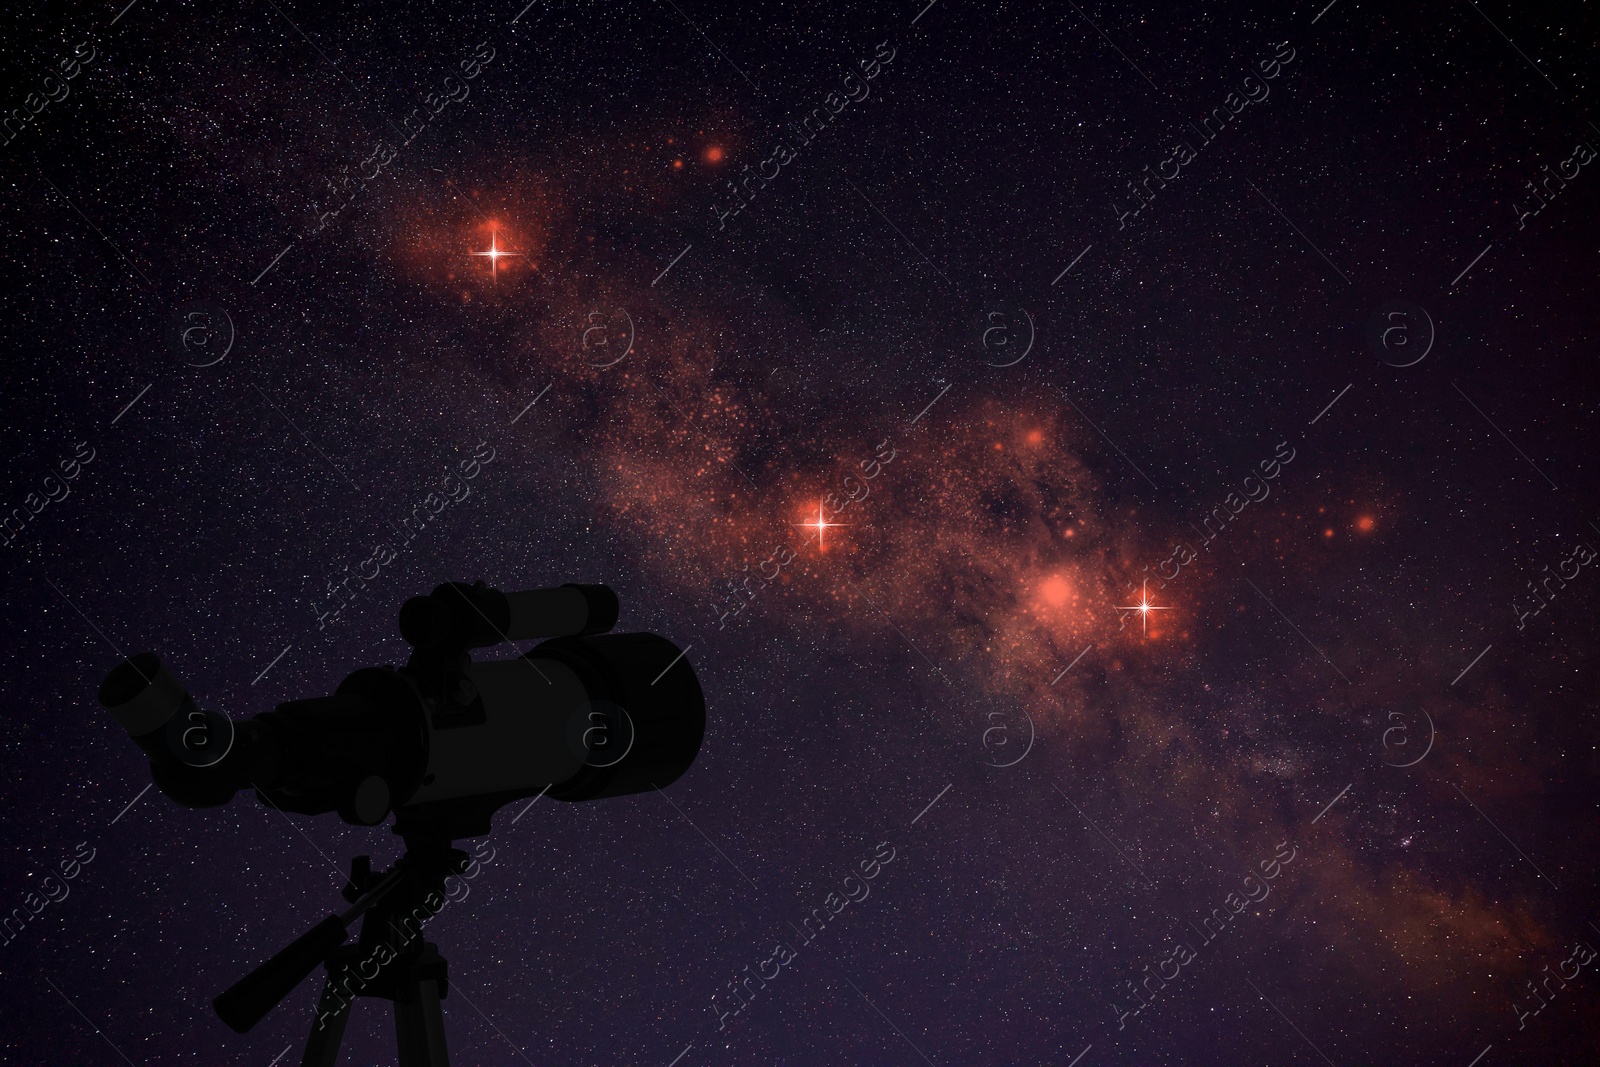 Image of Astronomy. Viewing beautiful starry sky through telescope at night